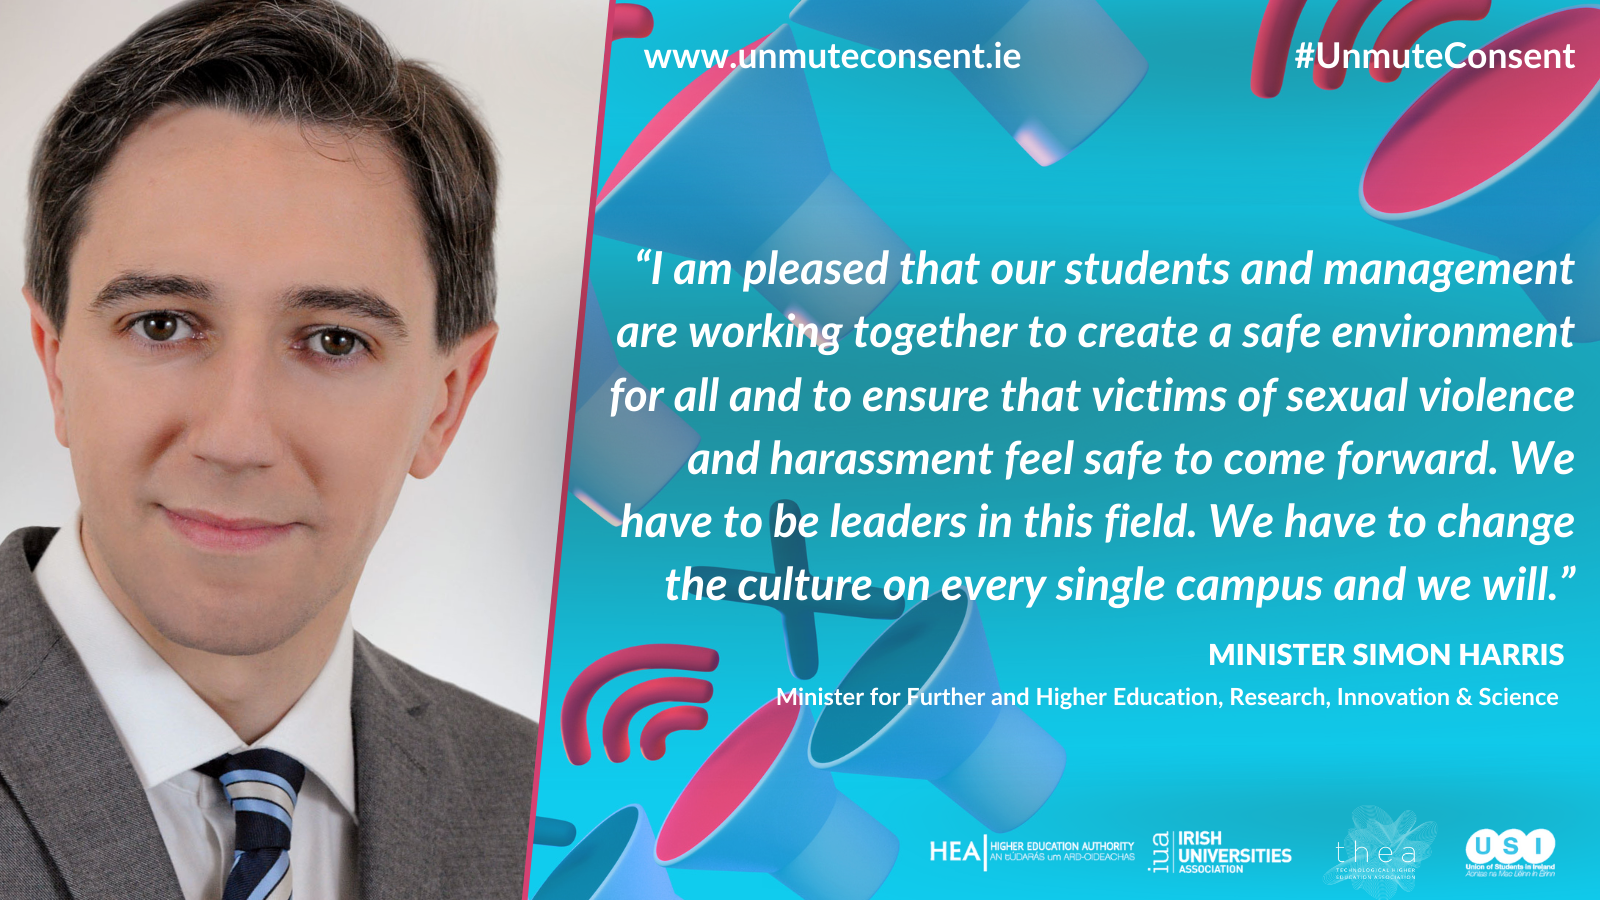 Headshot of Simon Harris next to a quote in support of the #Unmute Consent campaign